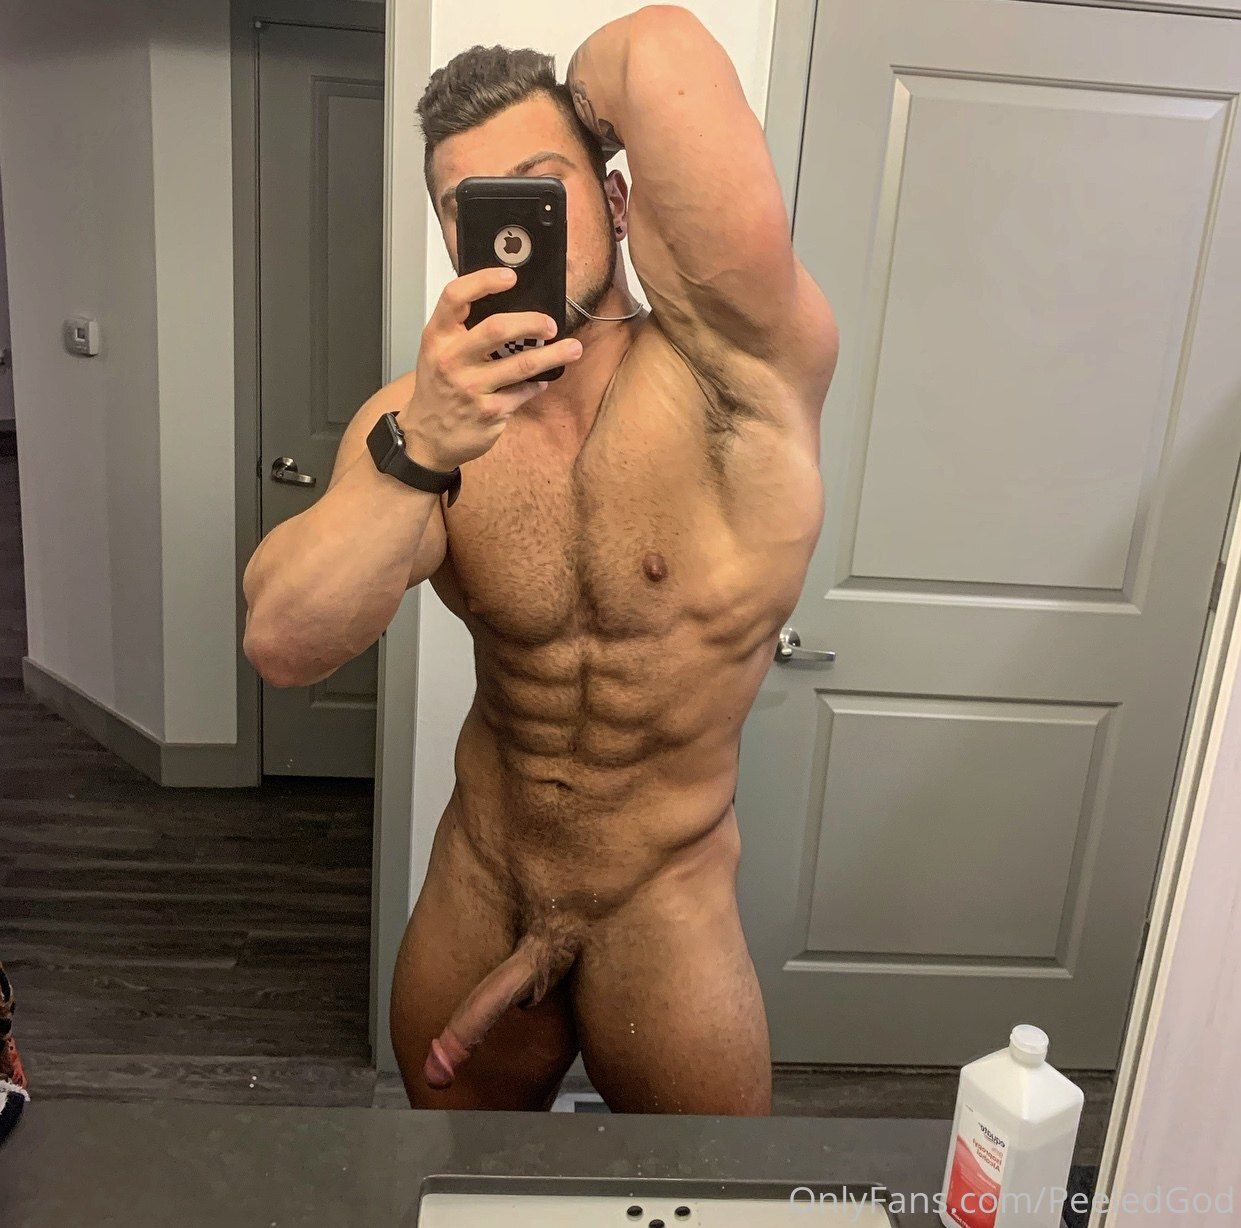 Peeledgod Onlyfans - Massive muscles and monster cock 